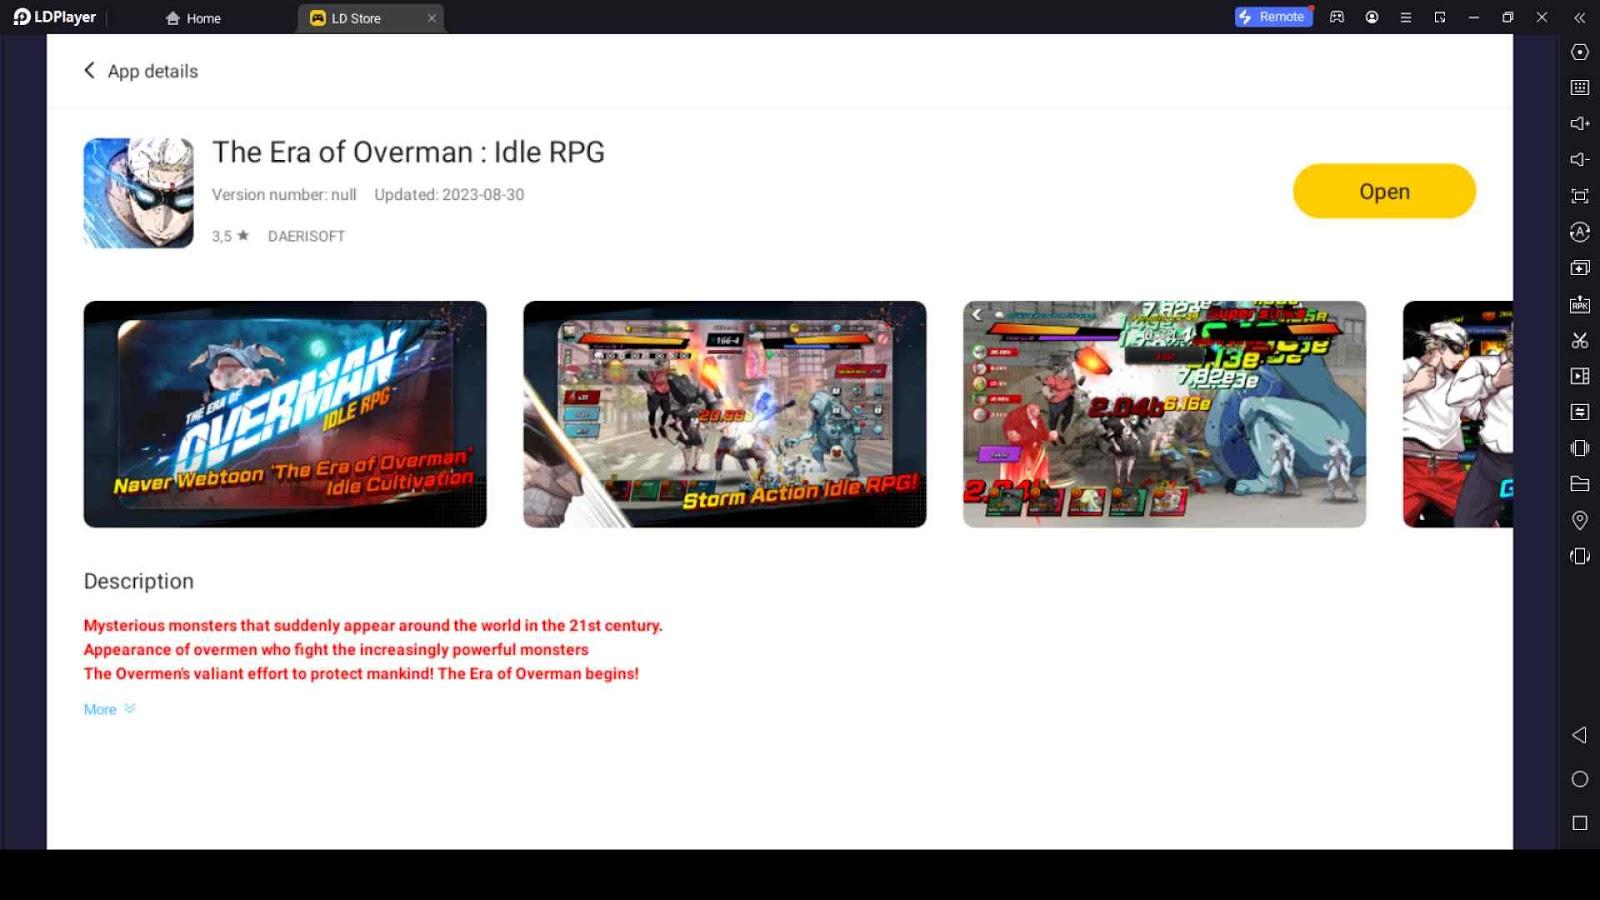 Playing The Era of Overman: Idle RPG on PC Using LDPlayer 9